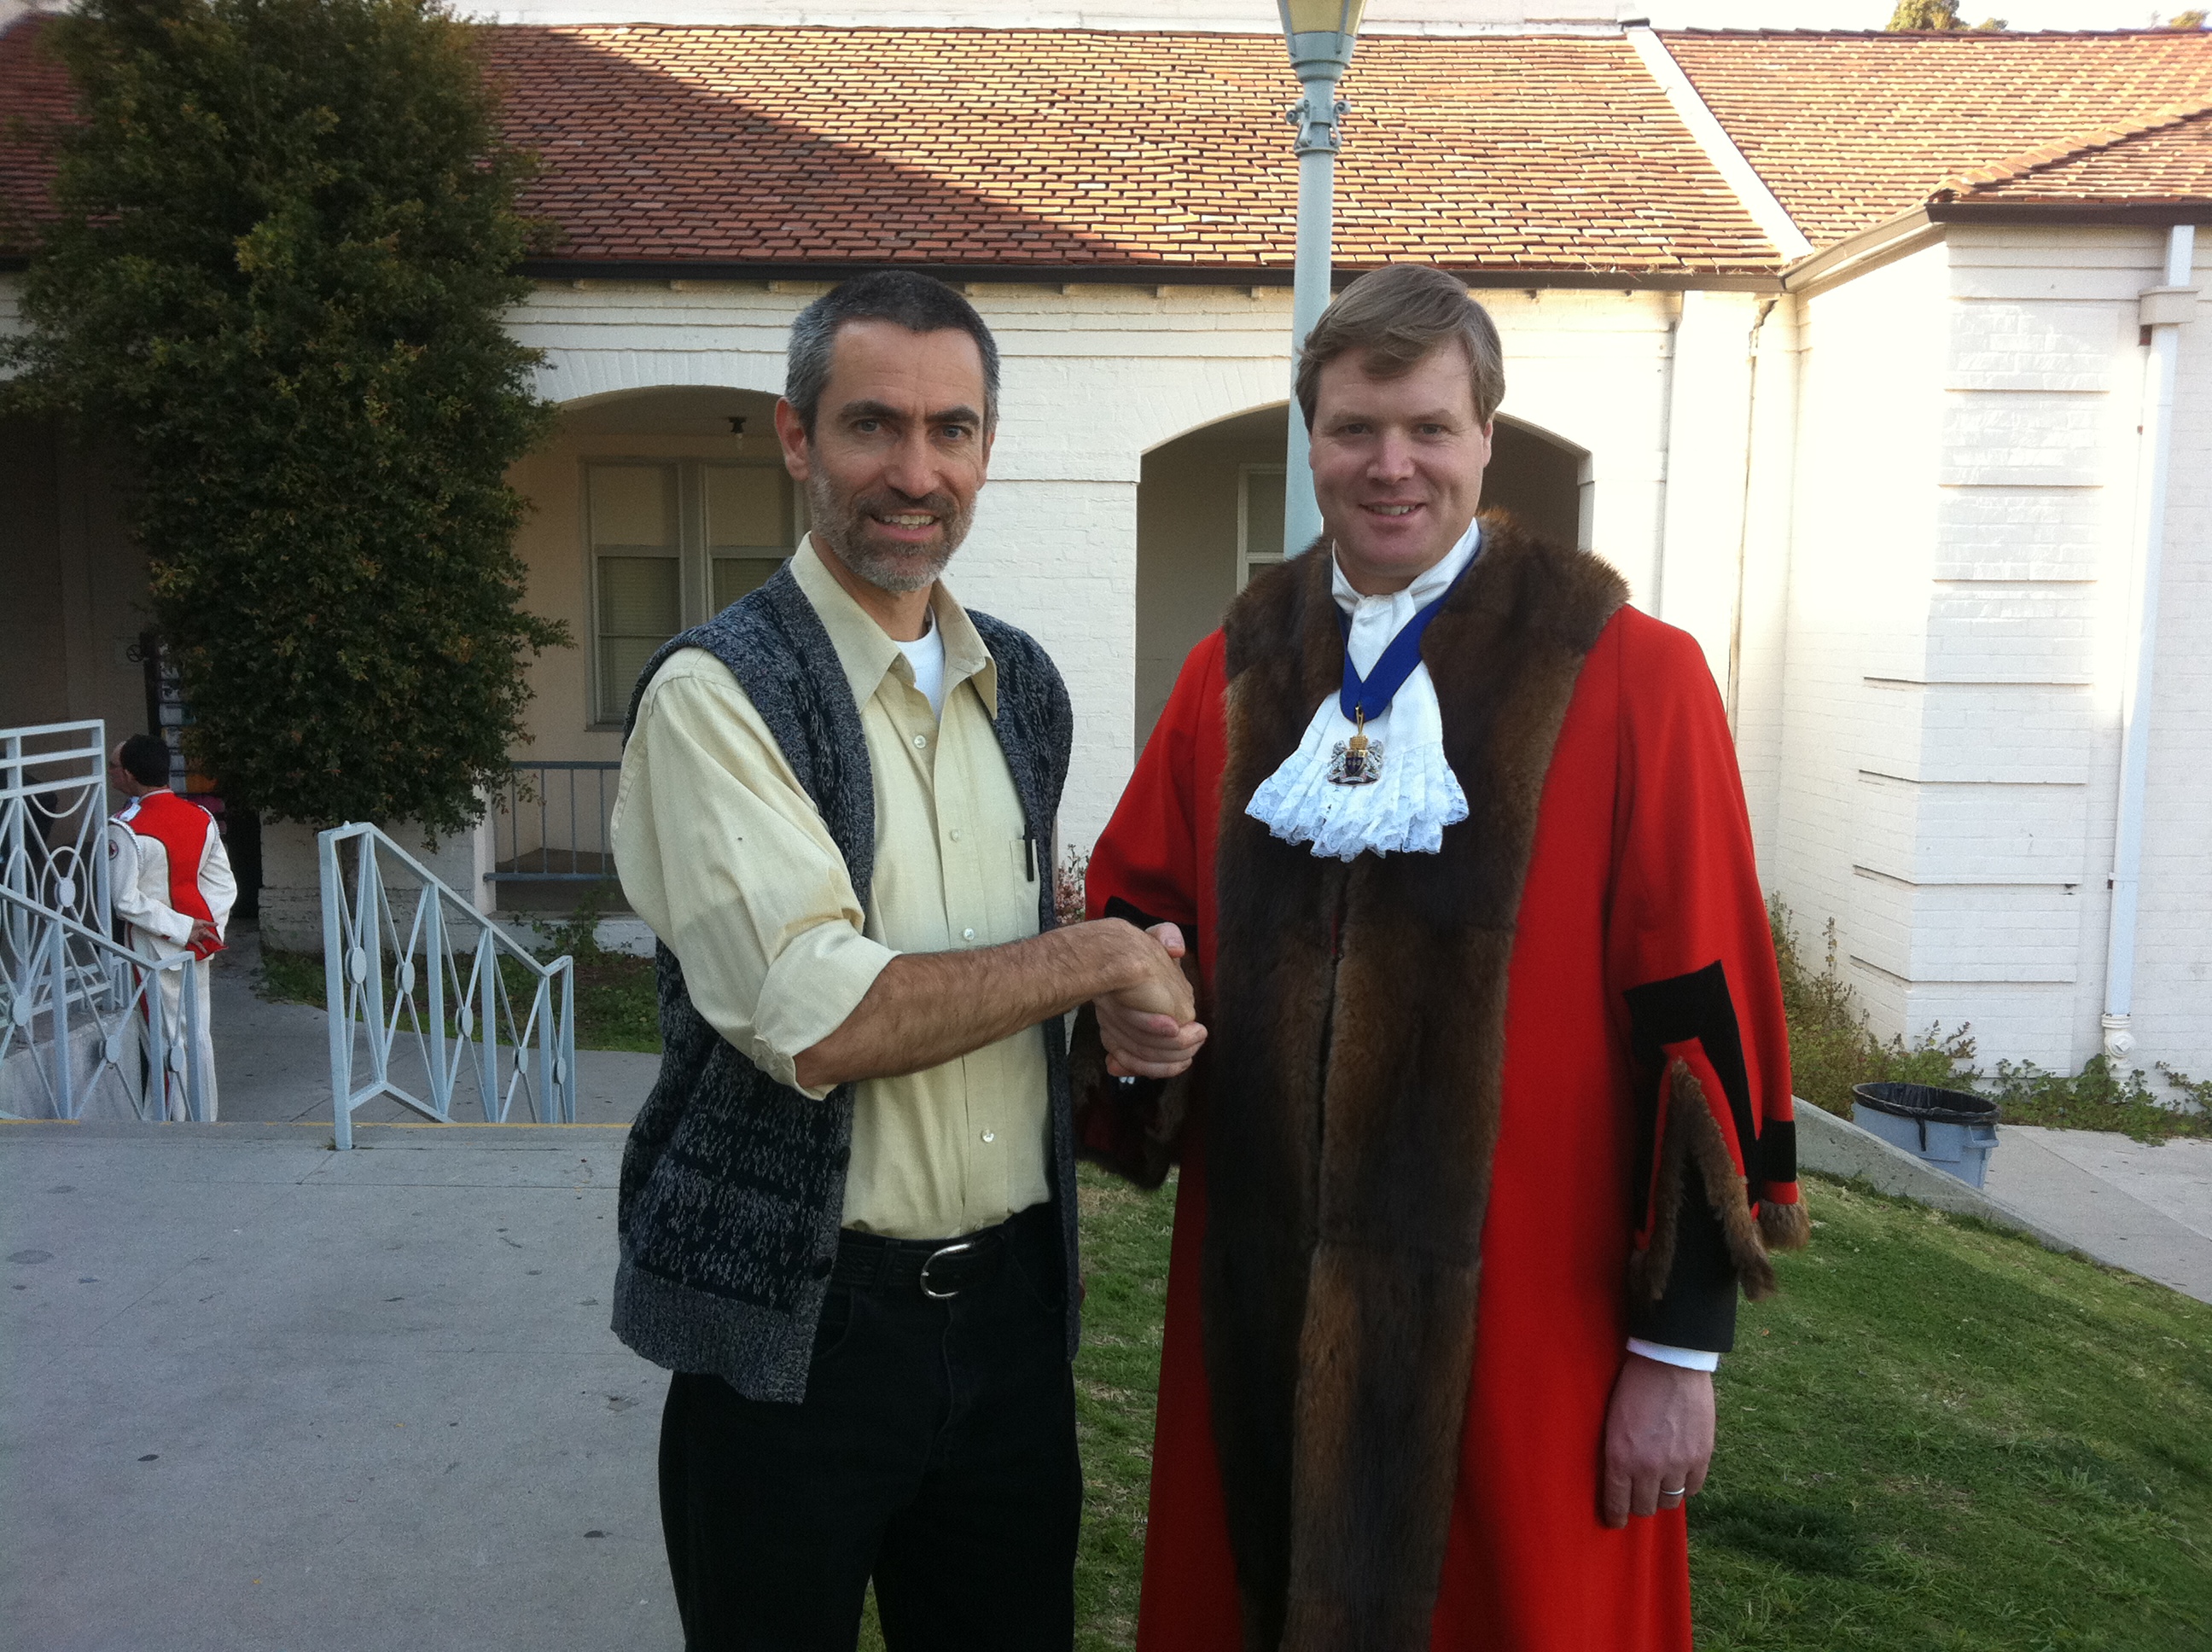 Councillor Duncan Sandys, great-grandson of the late Winston Churchill and former lord mayor of Westminster (2009-10),